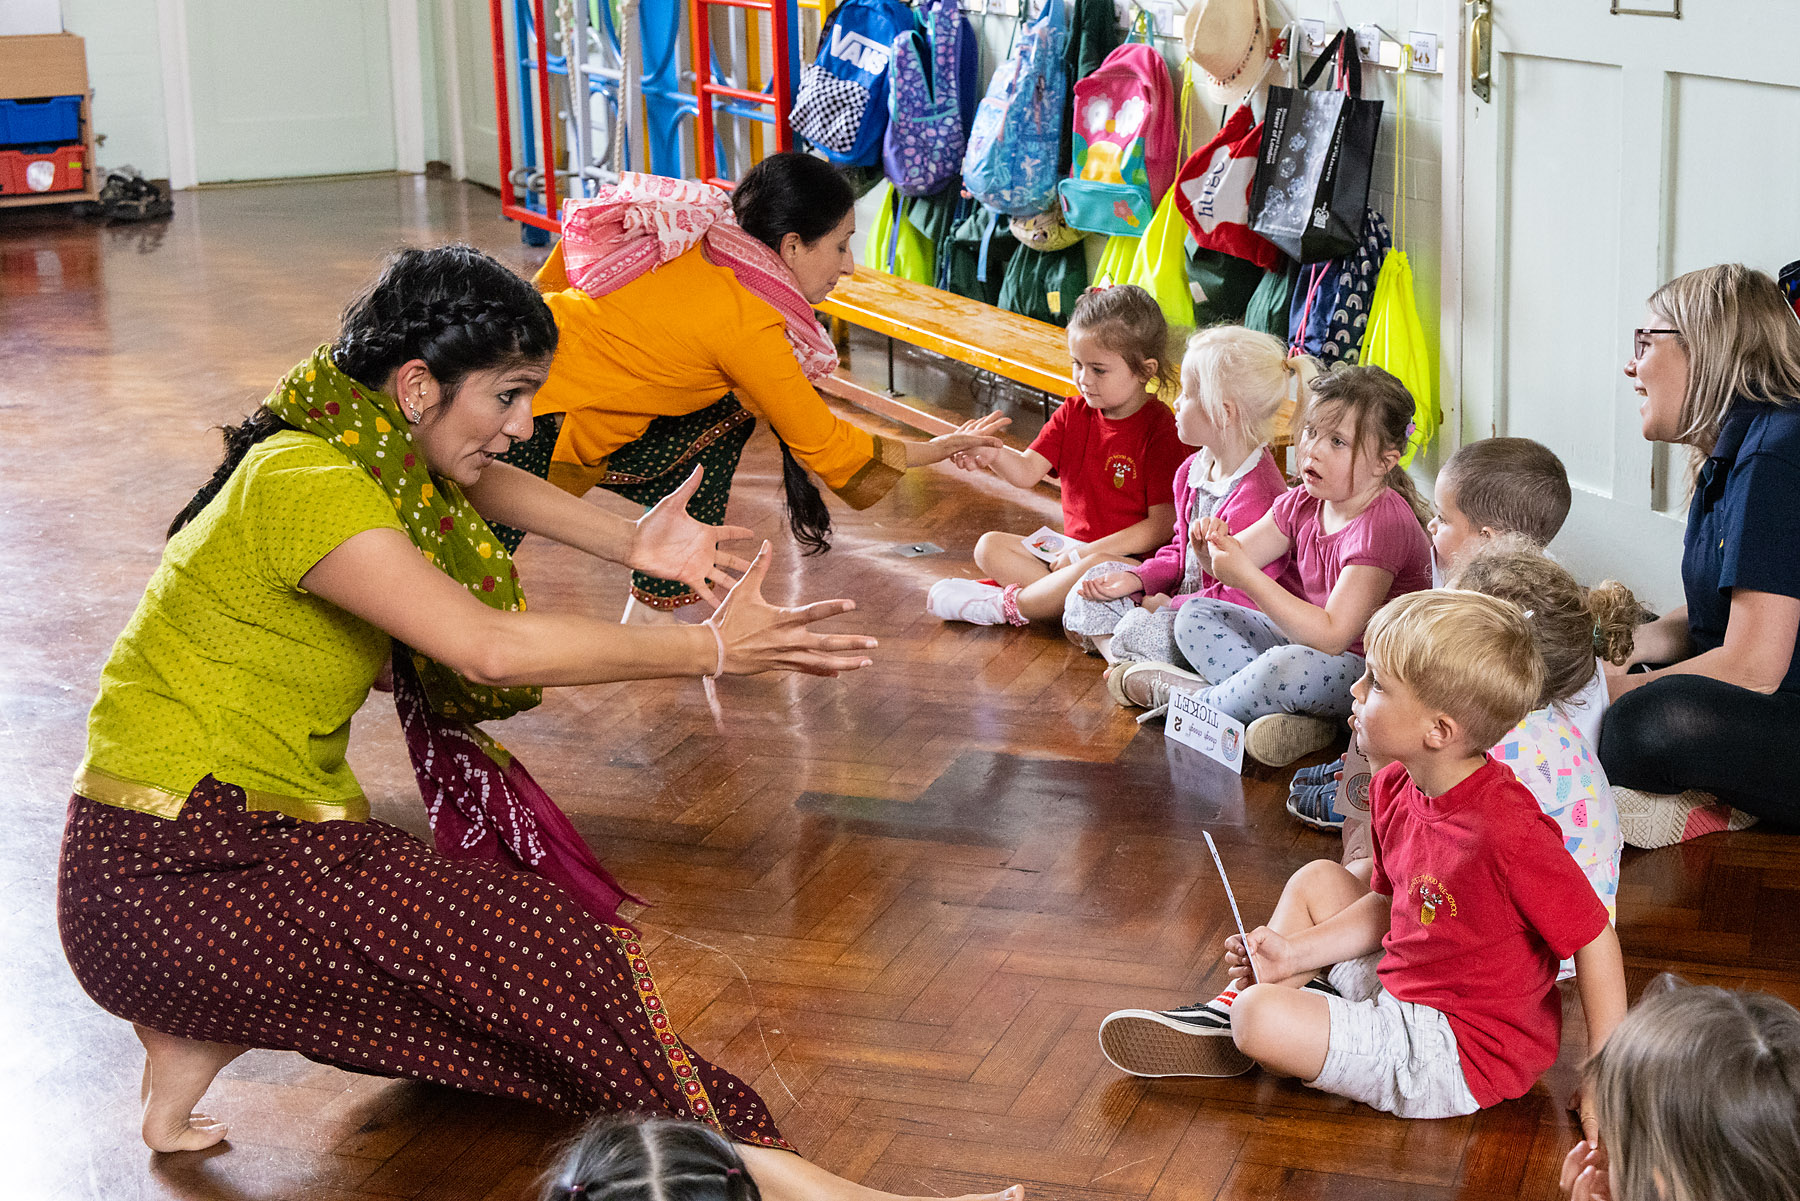 Two women of South Asian heritage are dressed in traditional South Asian clothing. They are knelt down on the floor in front of a row of school children. Their hands point towards the children as the children gaze back at the performers.